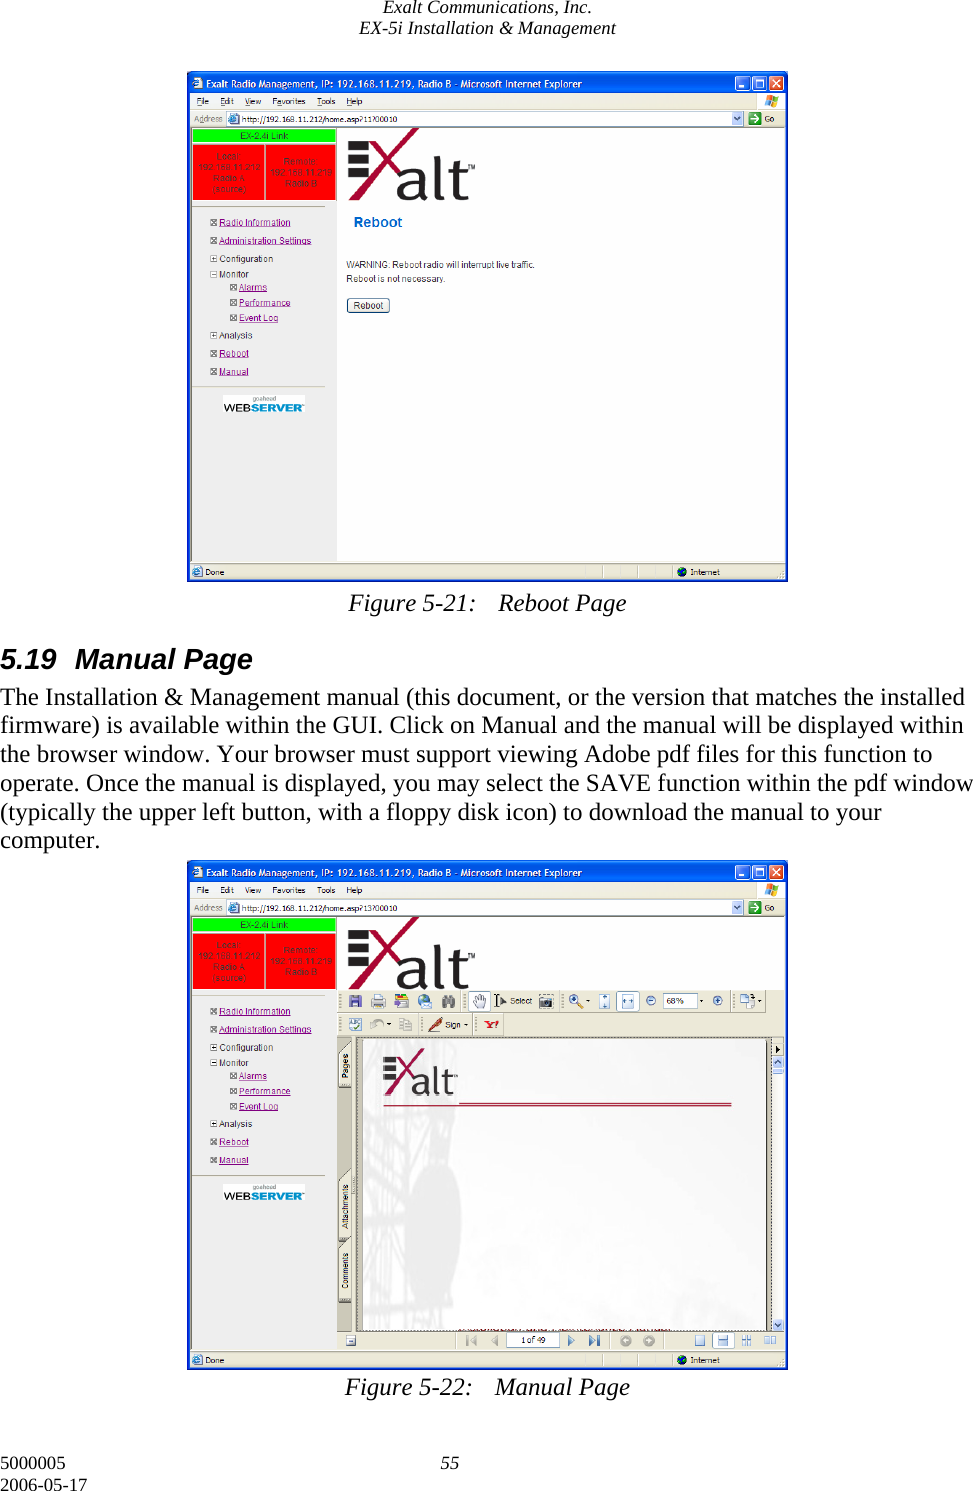 Exalt Communications, Inc. EX-5i Installation &amp; Management 5000005  55 2006-05-17                   Figure 5-21:  Reboot Page 5.19 Manual Page The Installation &amp; Management manual (this document, or the version that matches the installed firmware) is available within the GUI. Click on Manual and the manual will be displayed within the browser window. Your browser must support viewing Adobe pdf files for this function to operate. Once the manual is displayed, you may select the SAVE function within the pdf window (typically the upper left button, with a floppy disk icon) to download the manual to your computer.                   Figure 5-22:  Manual Page 